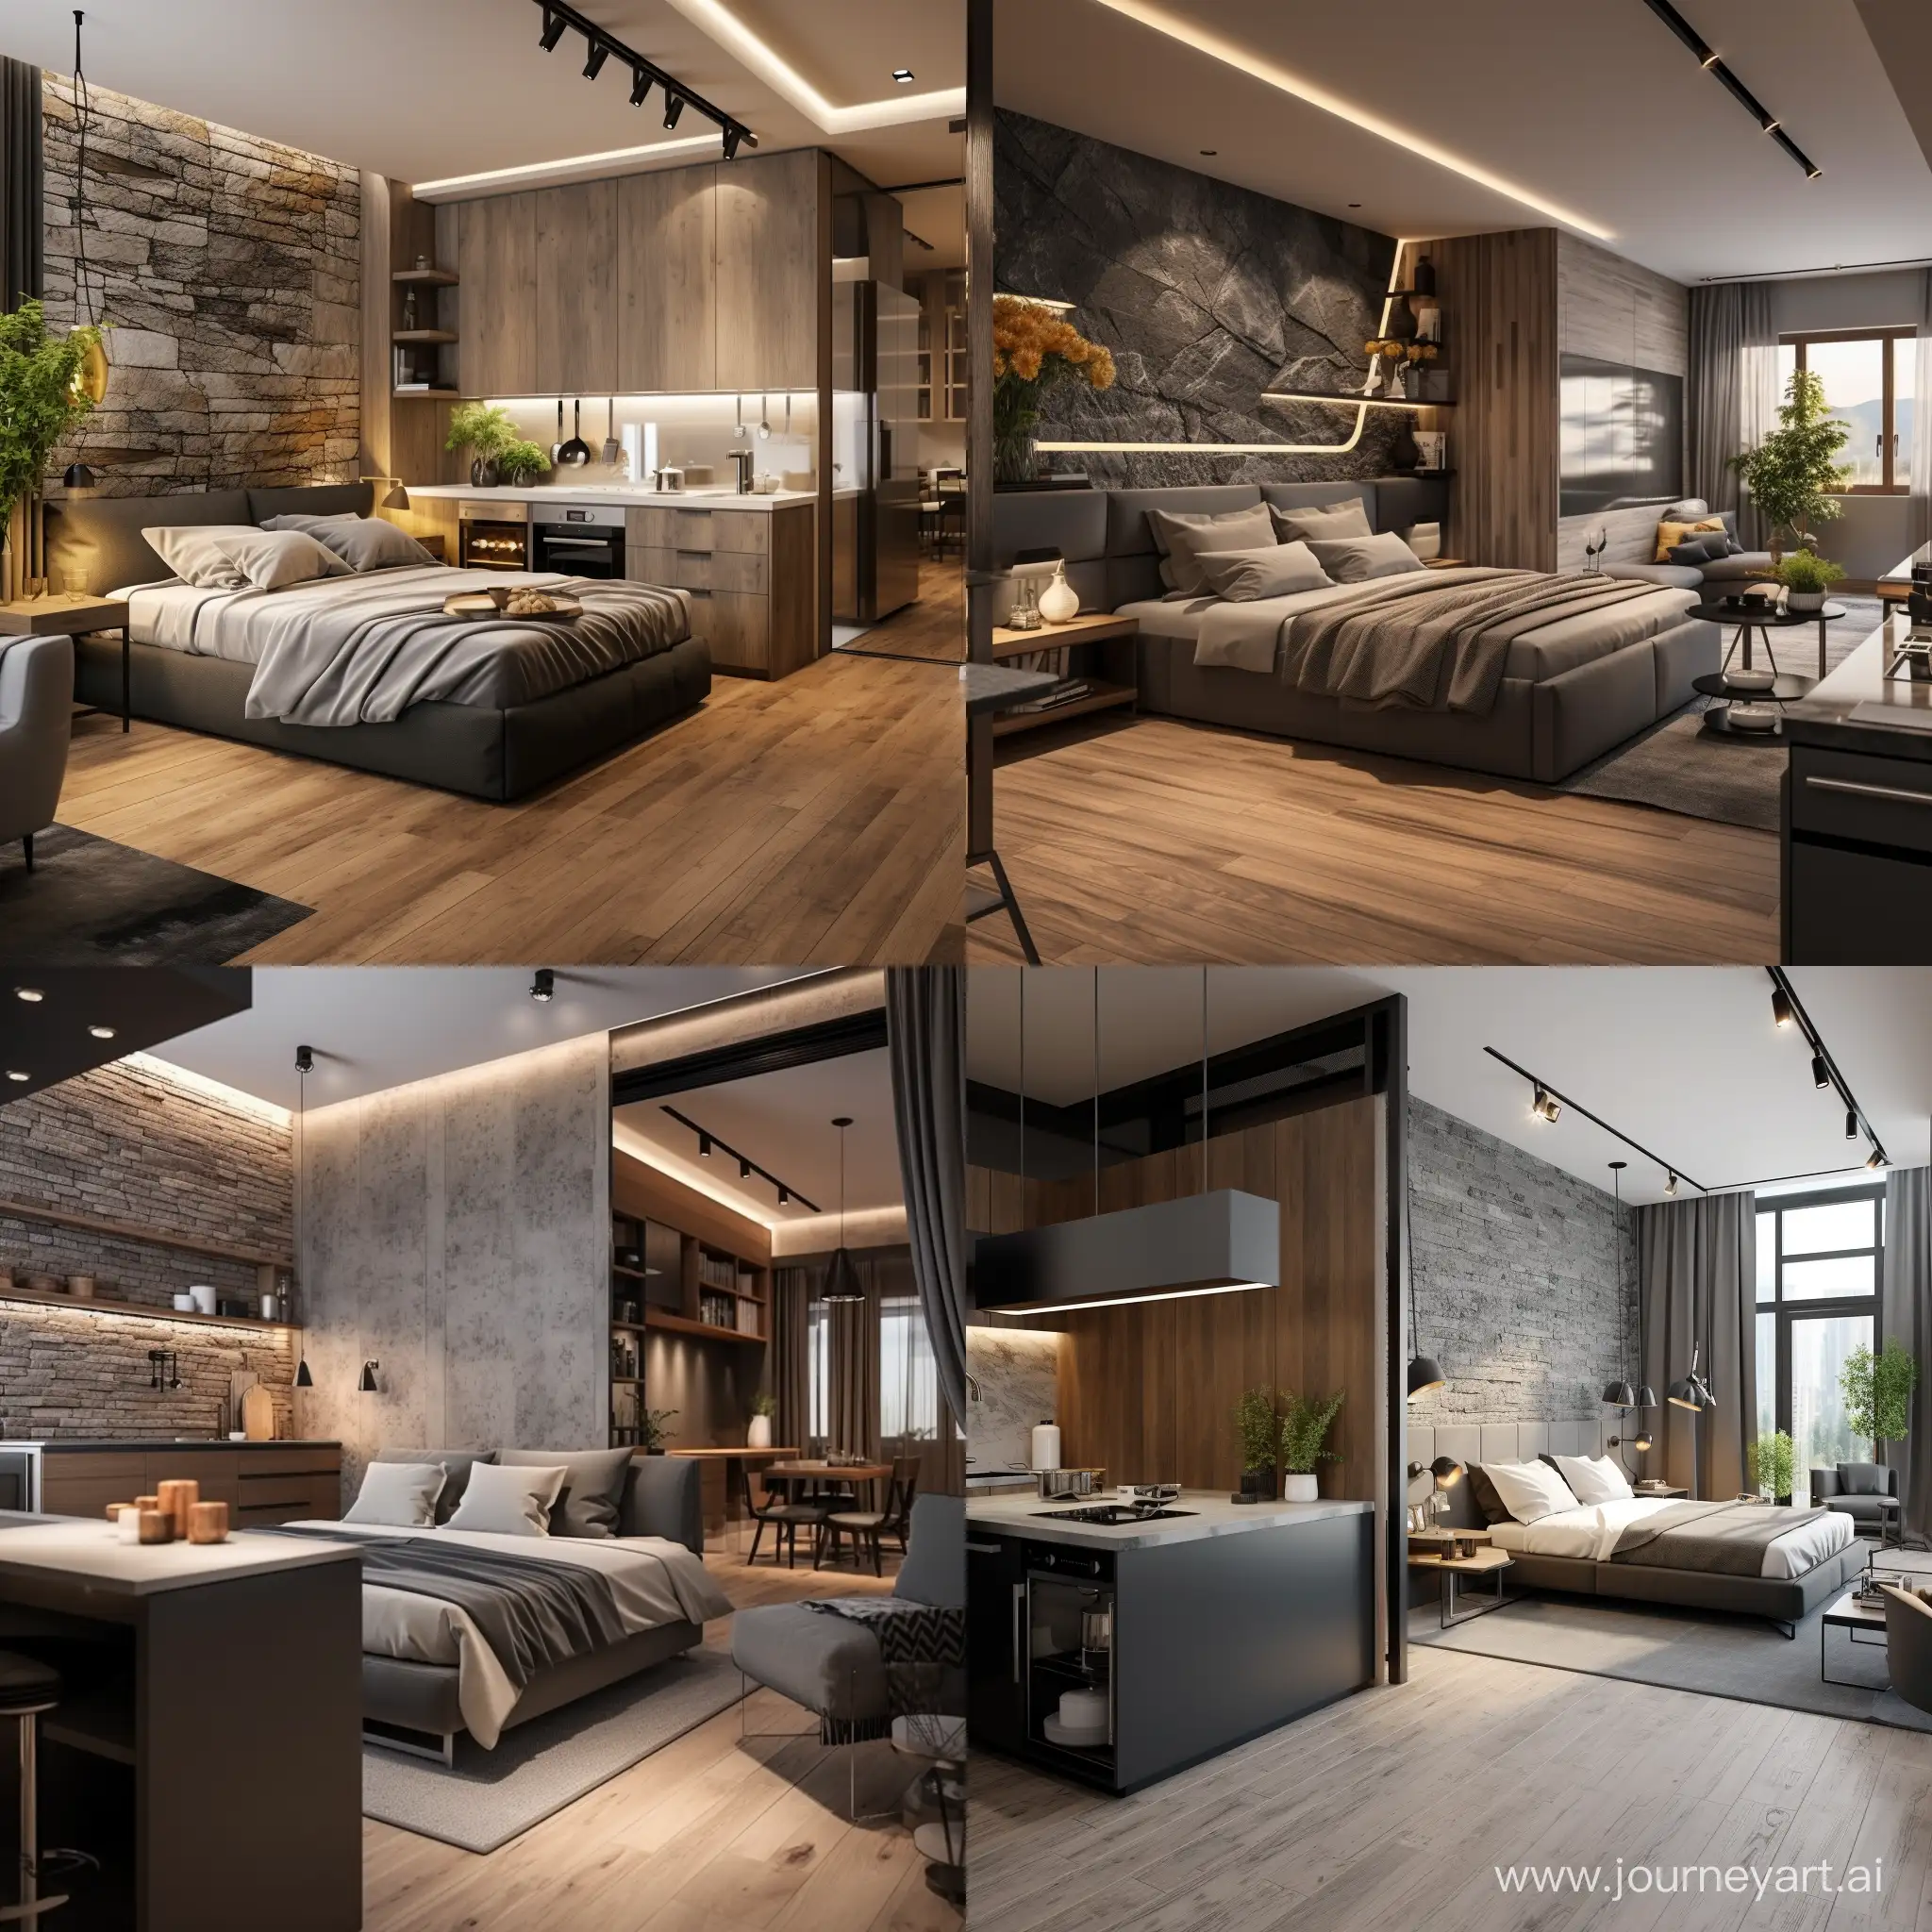 Modern-Studio-Apartment-Design-Artificial-Stone-Finishing-in-a-728-Meter-Space